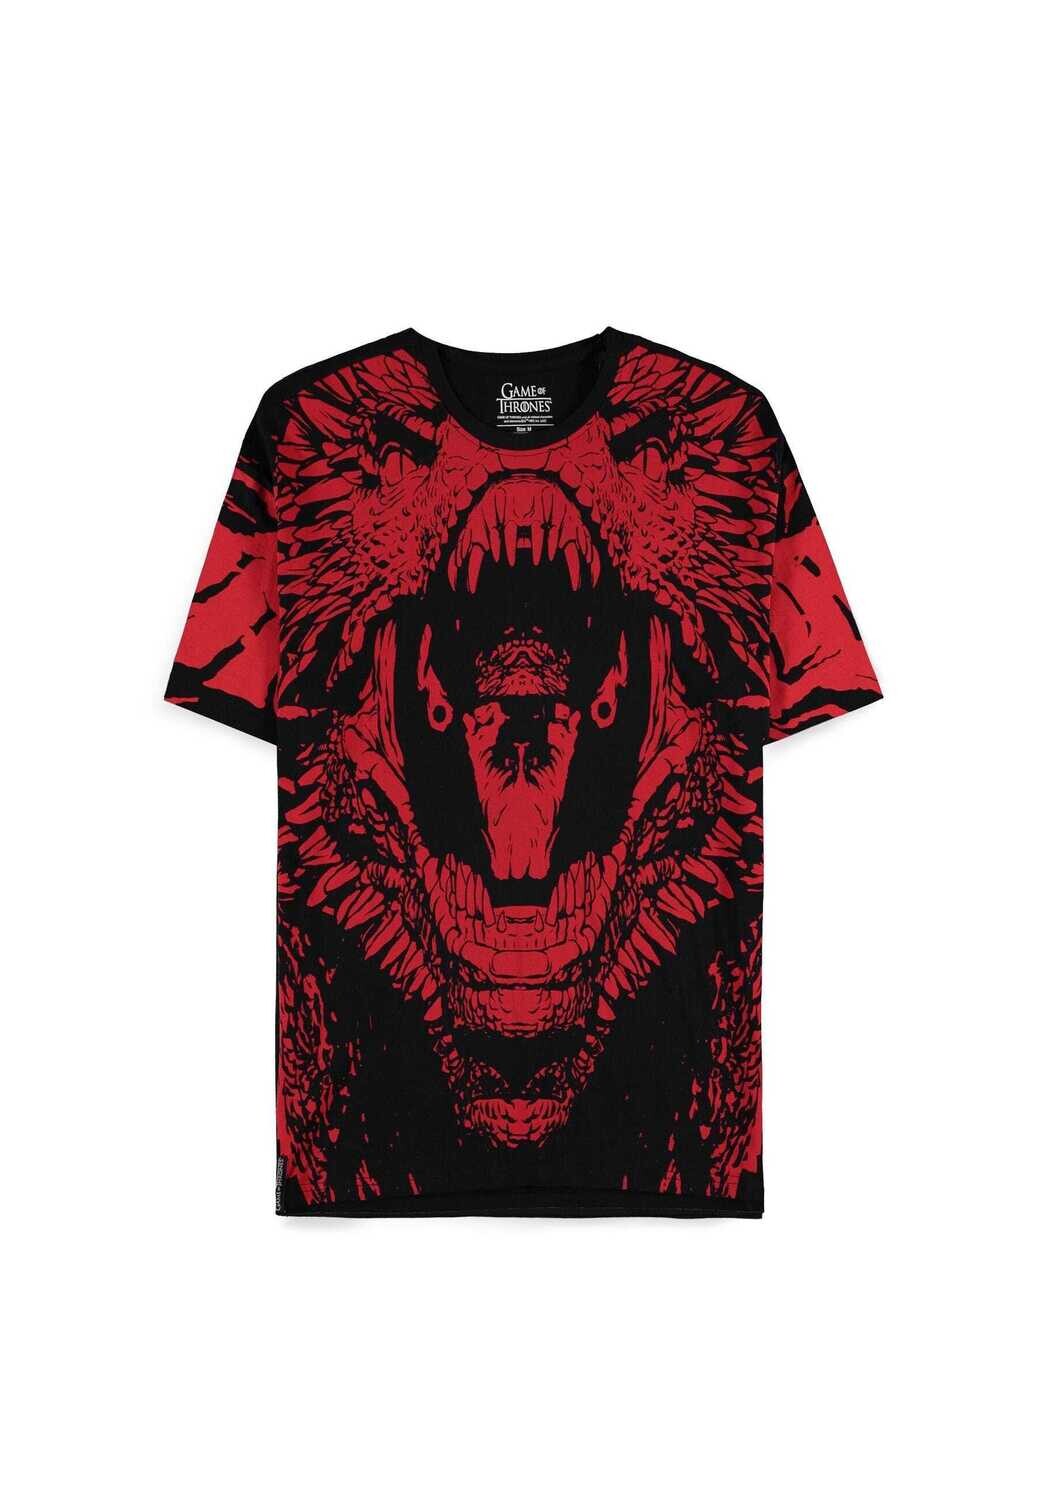 GOT - House Of The Dragon - Men's Loose Fit Short Sleeved T-shirt